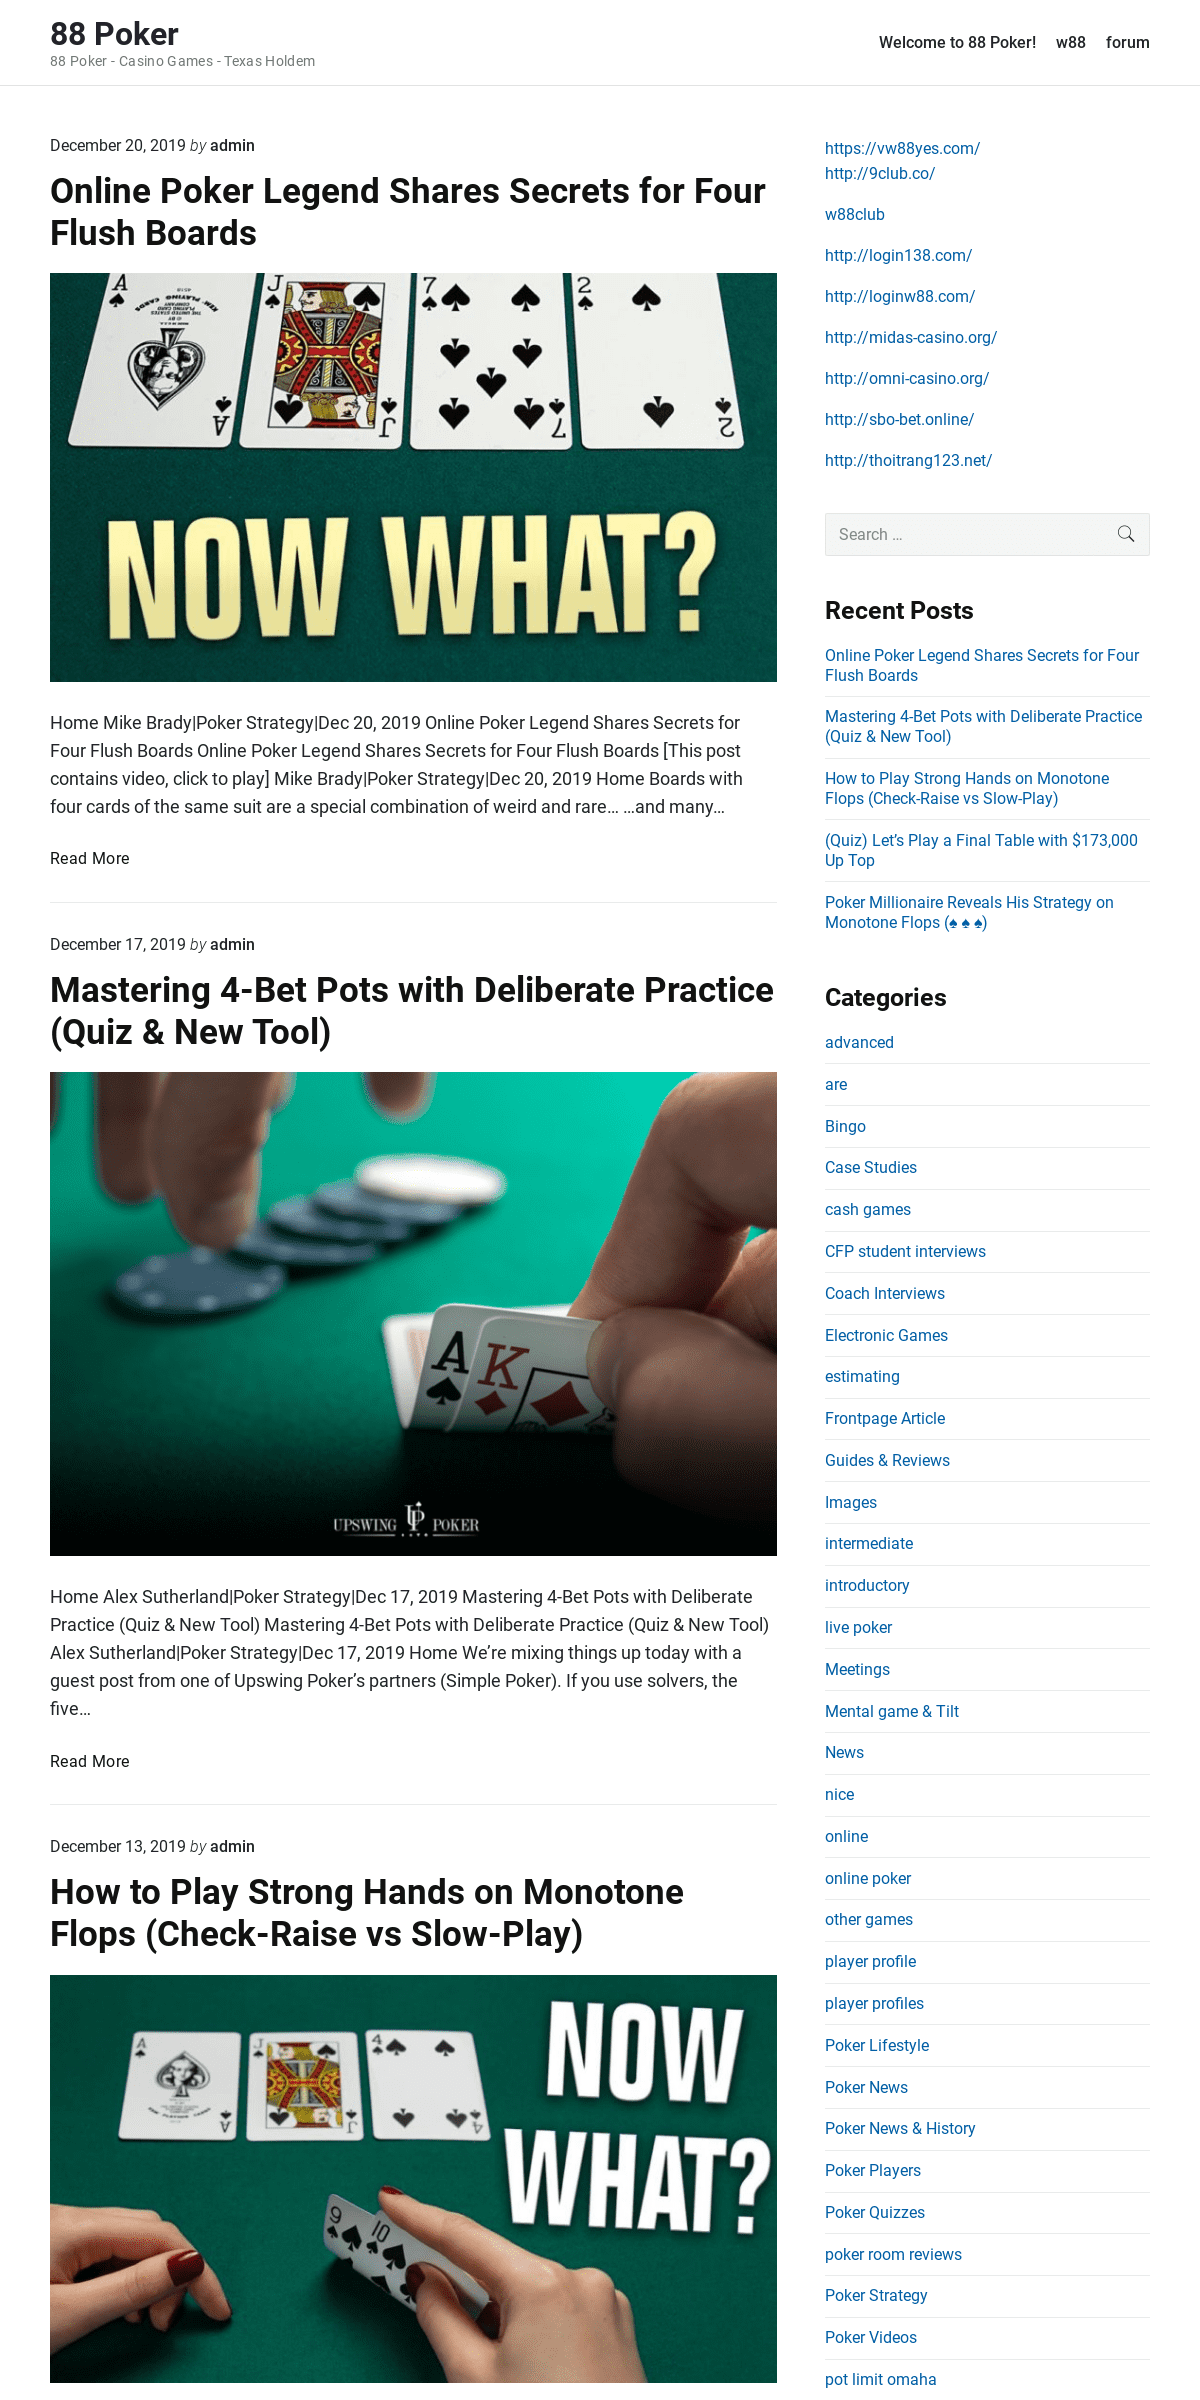 A complete backup of 88poker.co